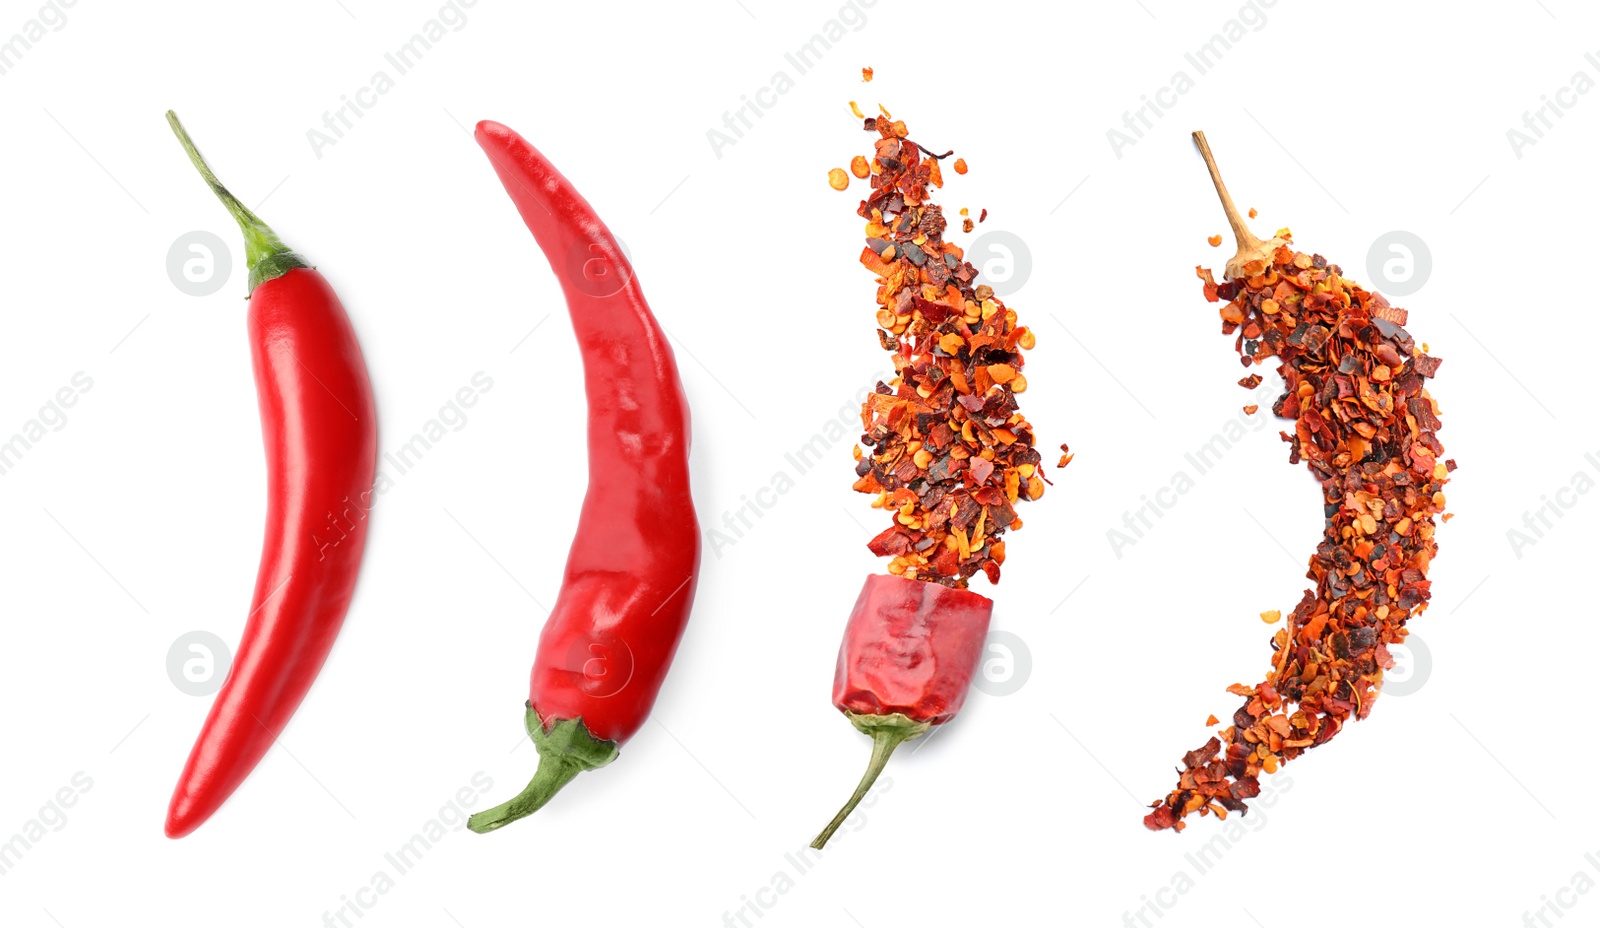 Image of Set with red hot chili peppers and flakes on white background